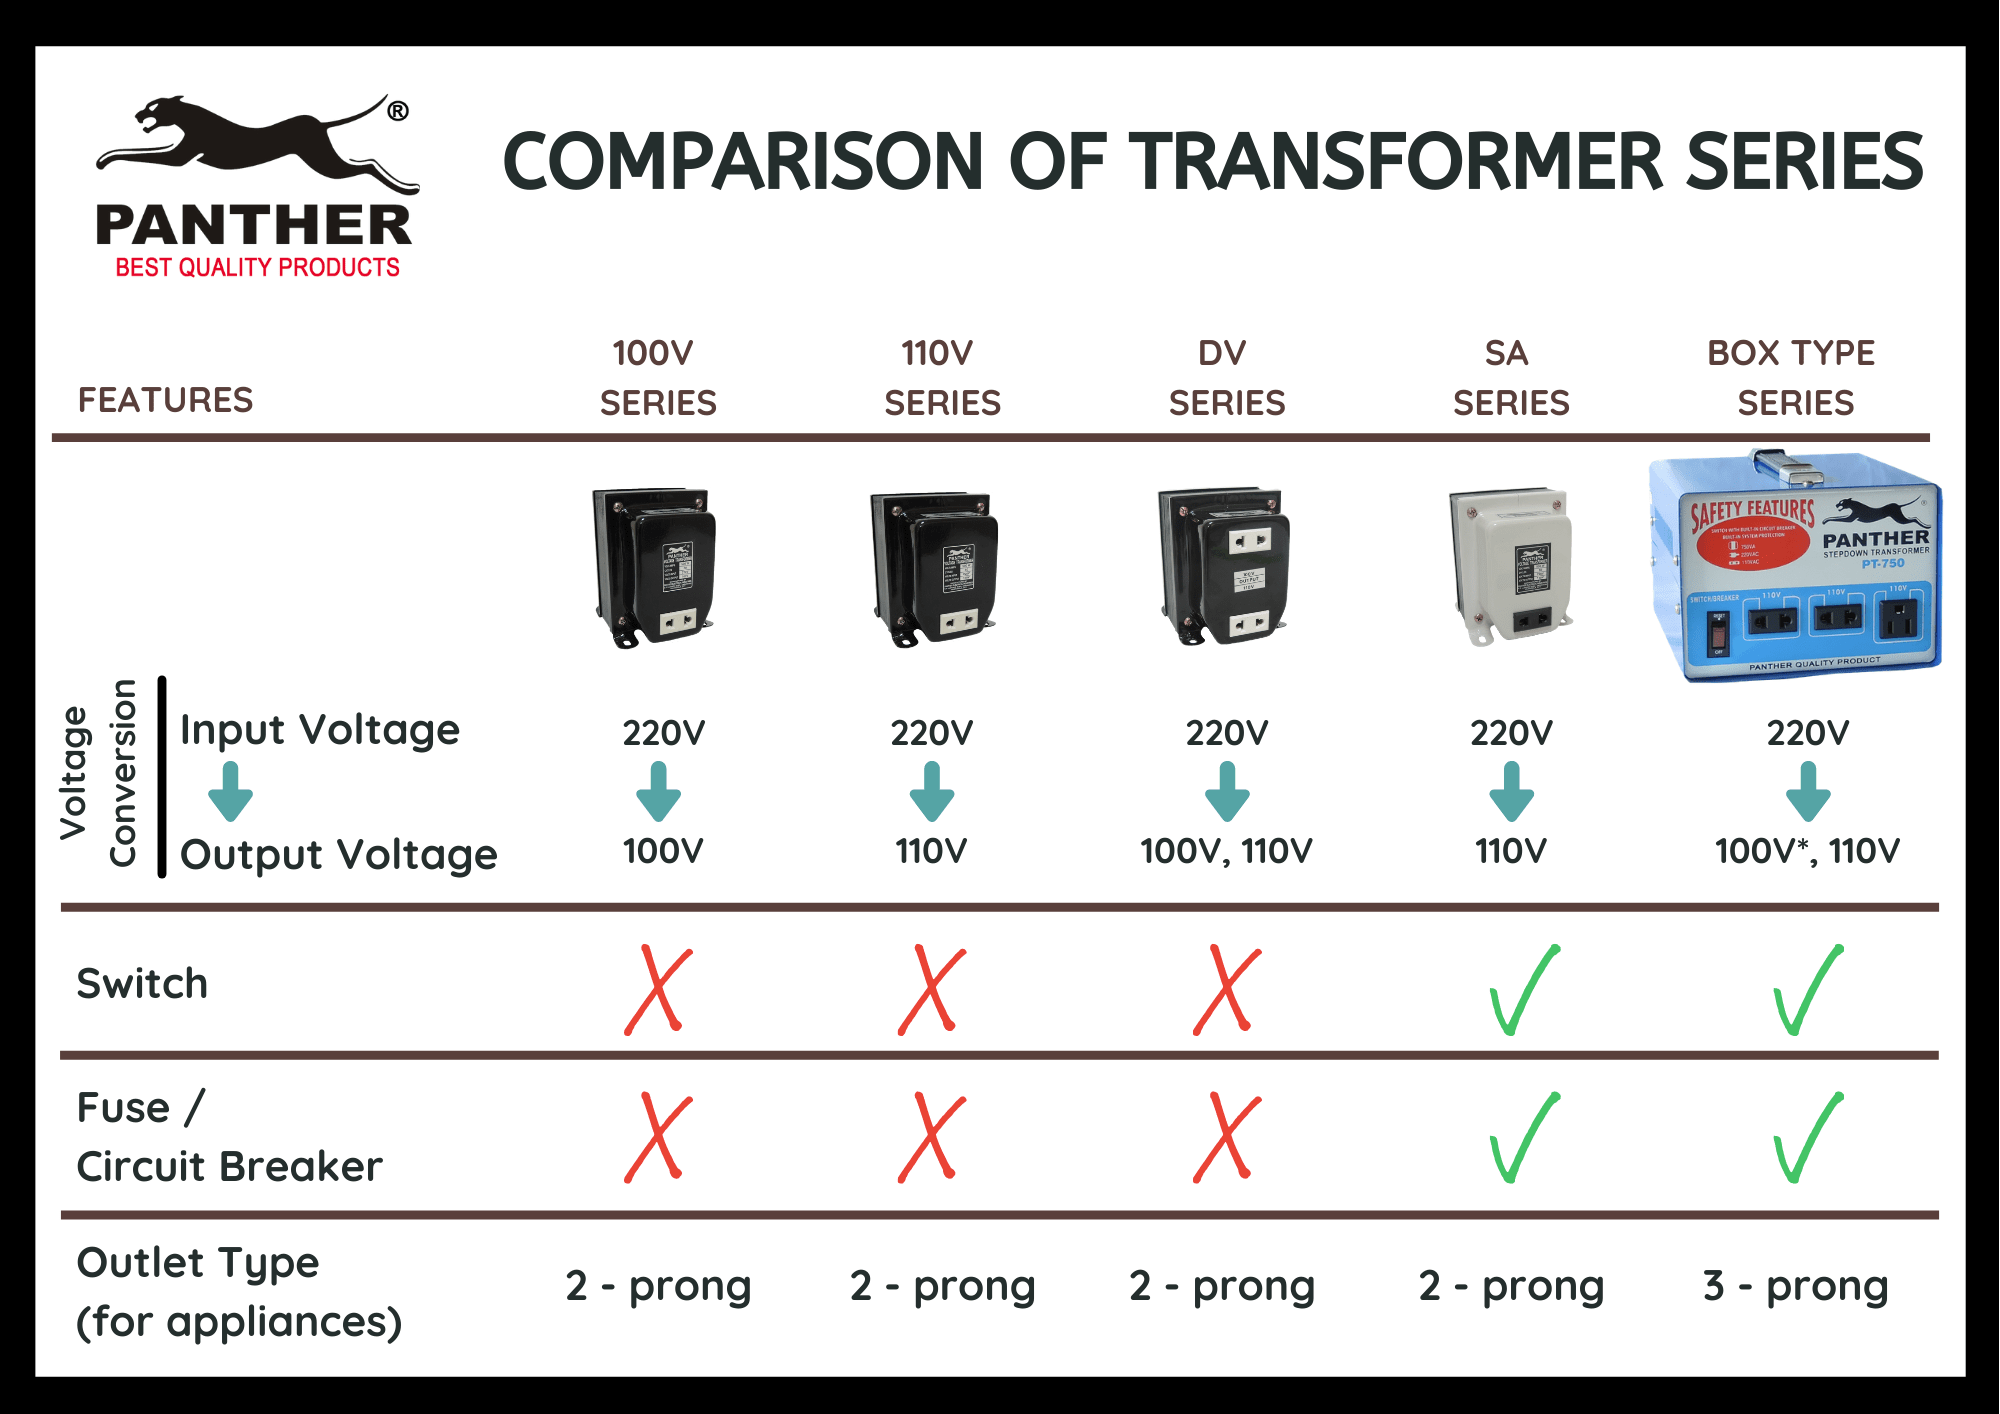 Transformer or AVR for your KitchenAid Mixer - Comparison-of-Panther-Transformer-Series-for-your-Kitchen-Aid-Mixer